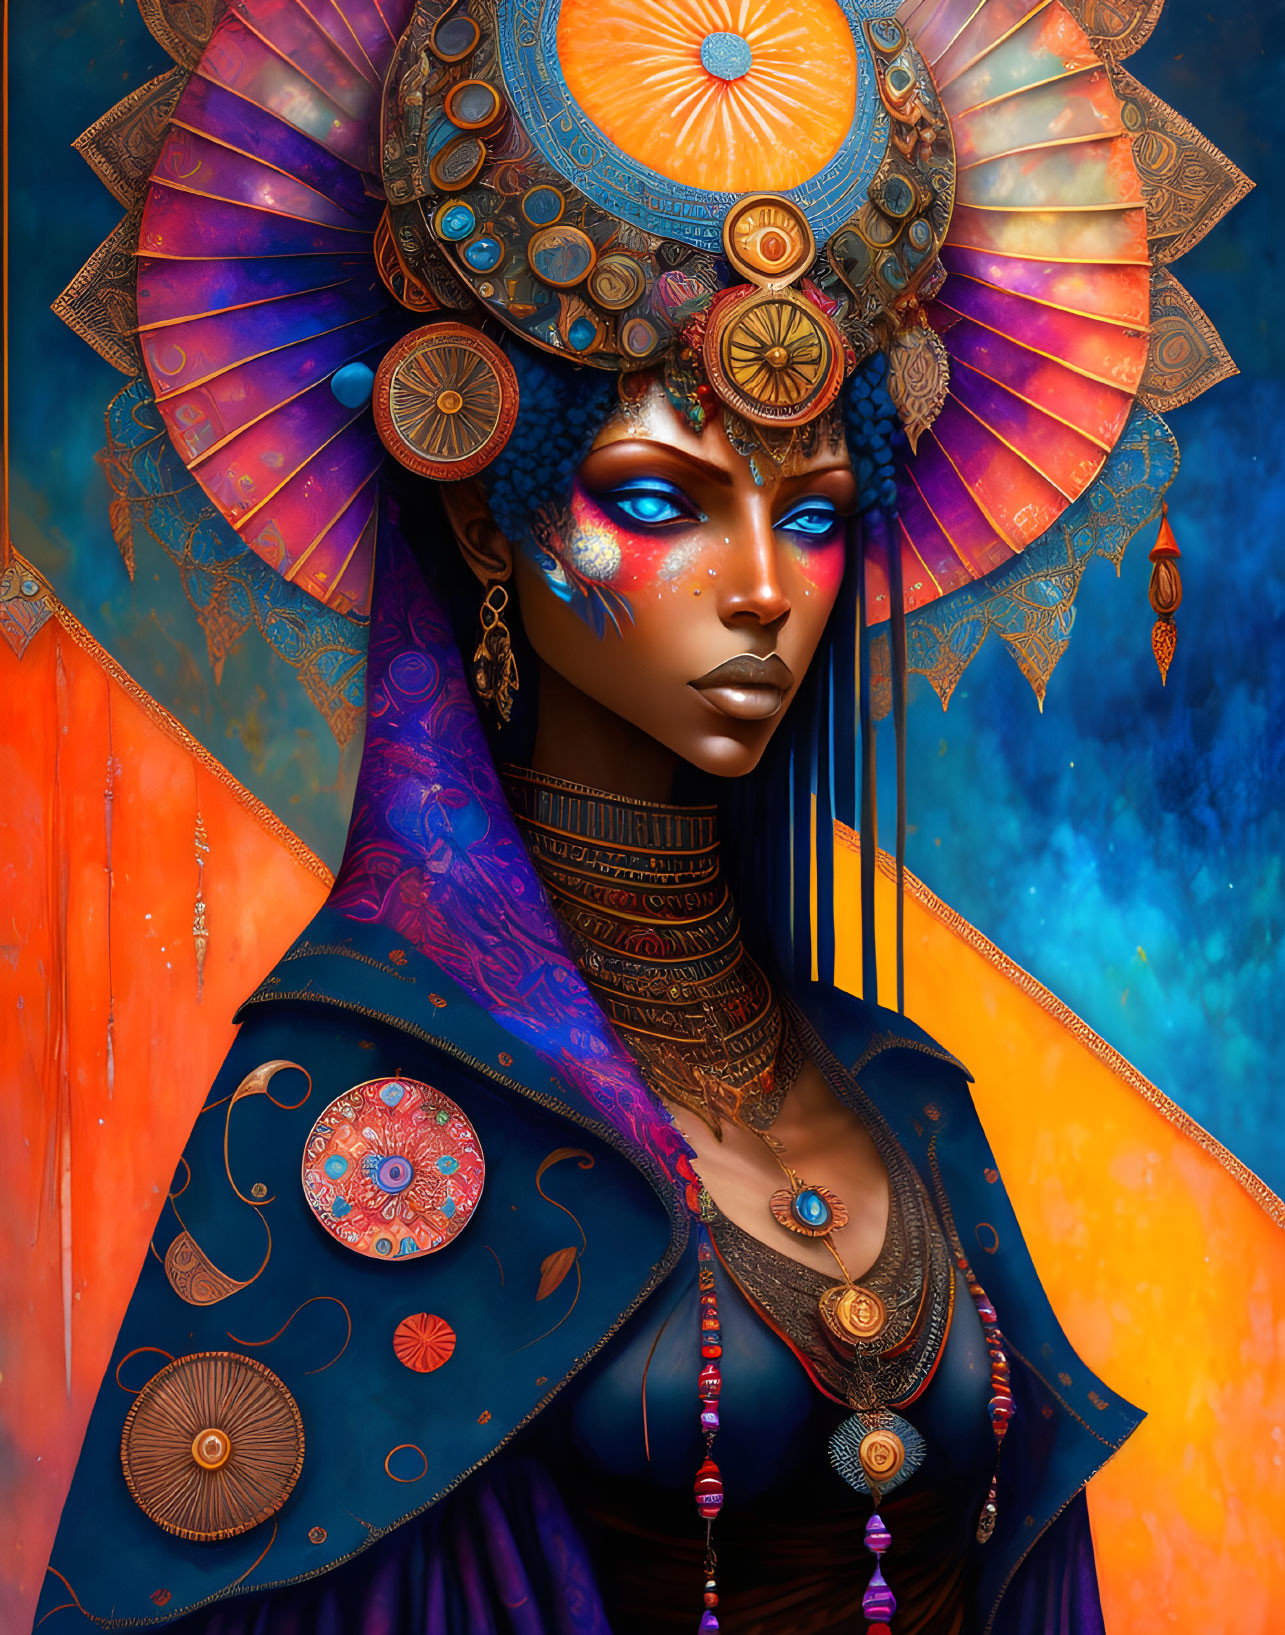 Colorful digital portrait of woman with blue skin, celestial headdress, jewelry, and ornate robes